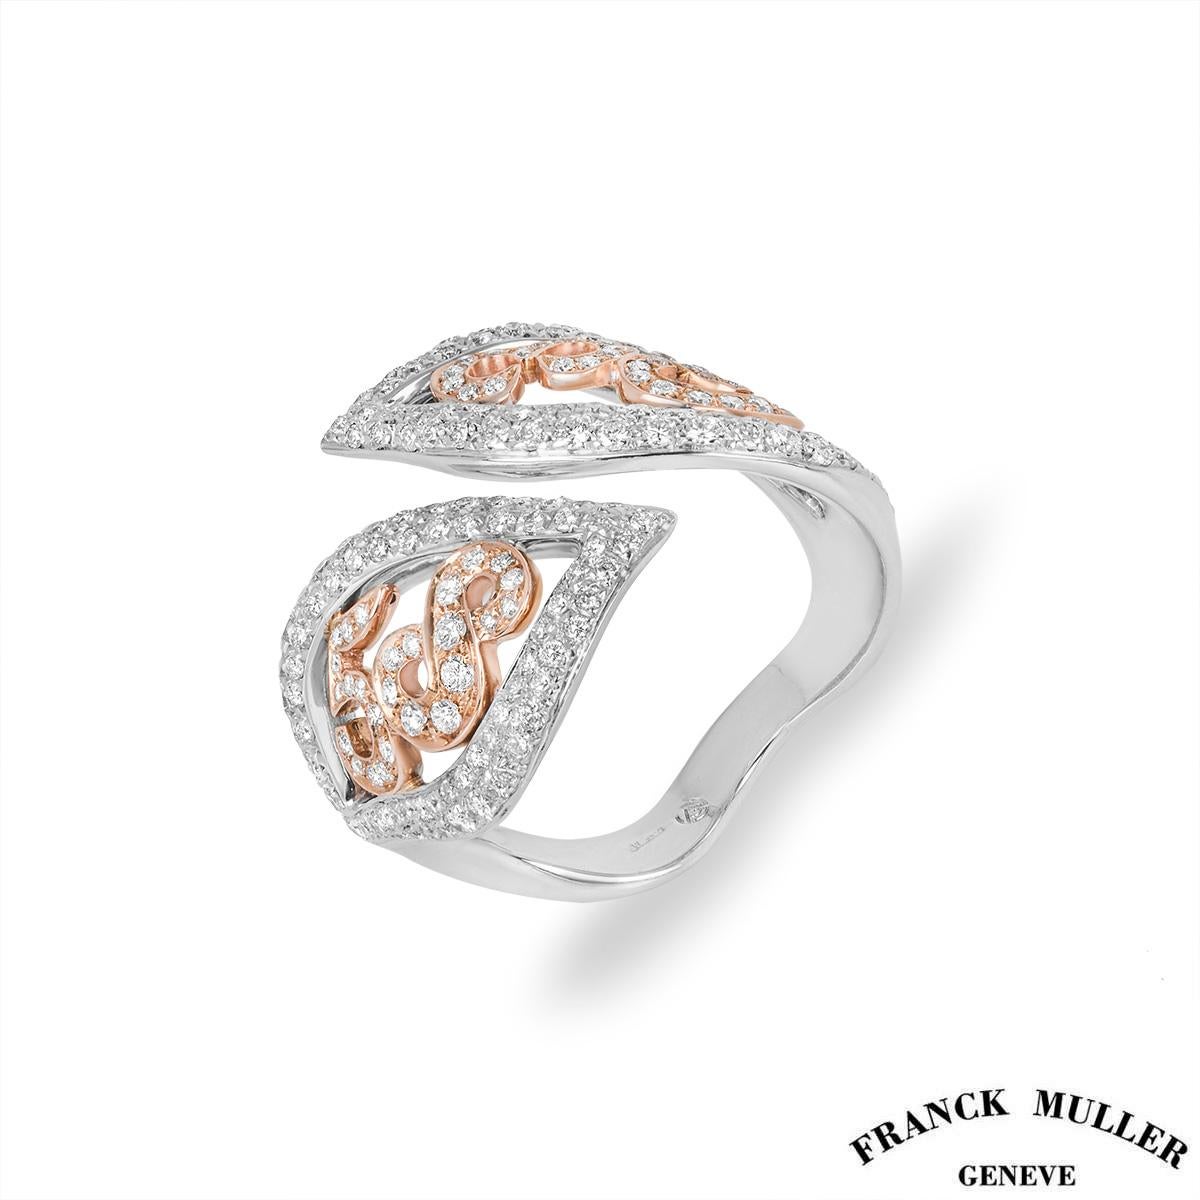 An elegant 18k white and rose gold diamond ring by Franck Muller from the Liberty collection. The ring features a diamond set open work bypass design set in white gold. Set in rose gold to the centre of the motifs are the numbers 5, 8, 3 and 6. The